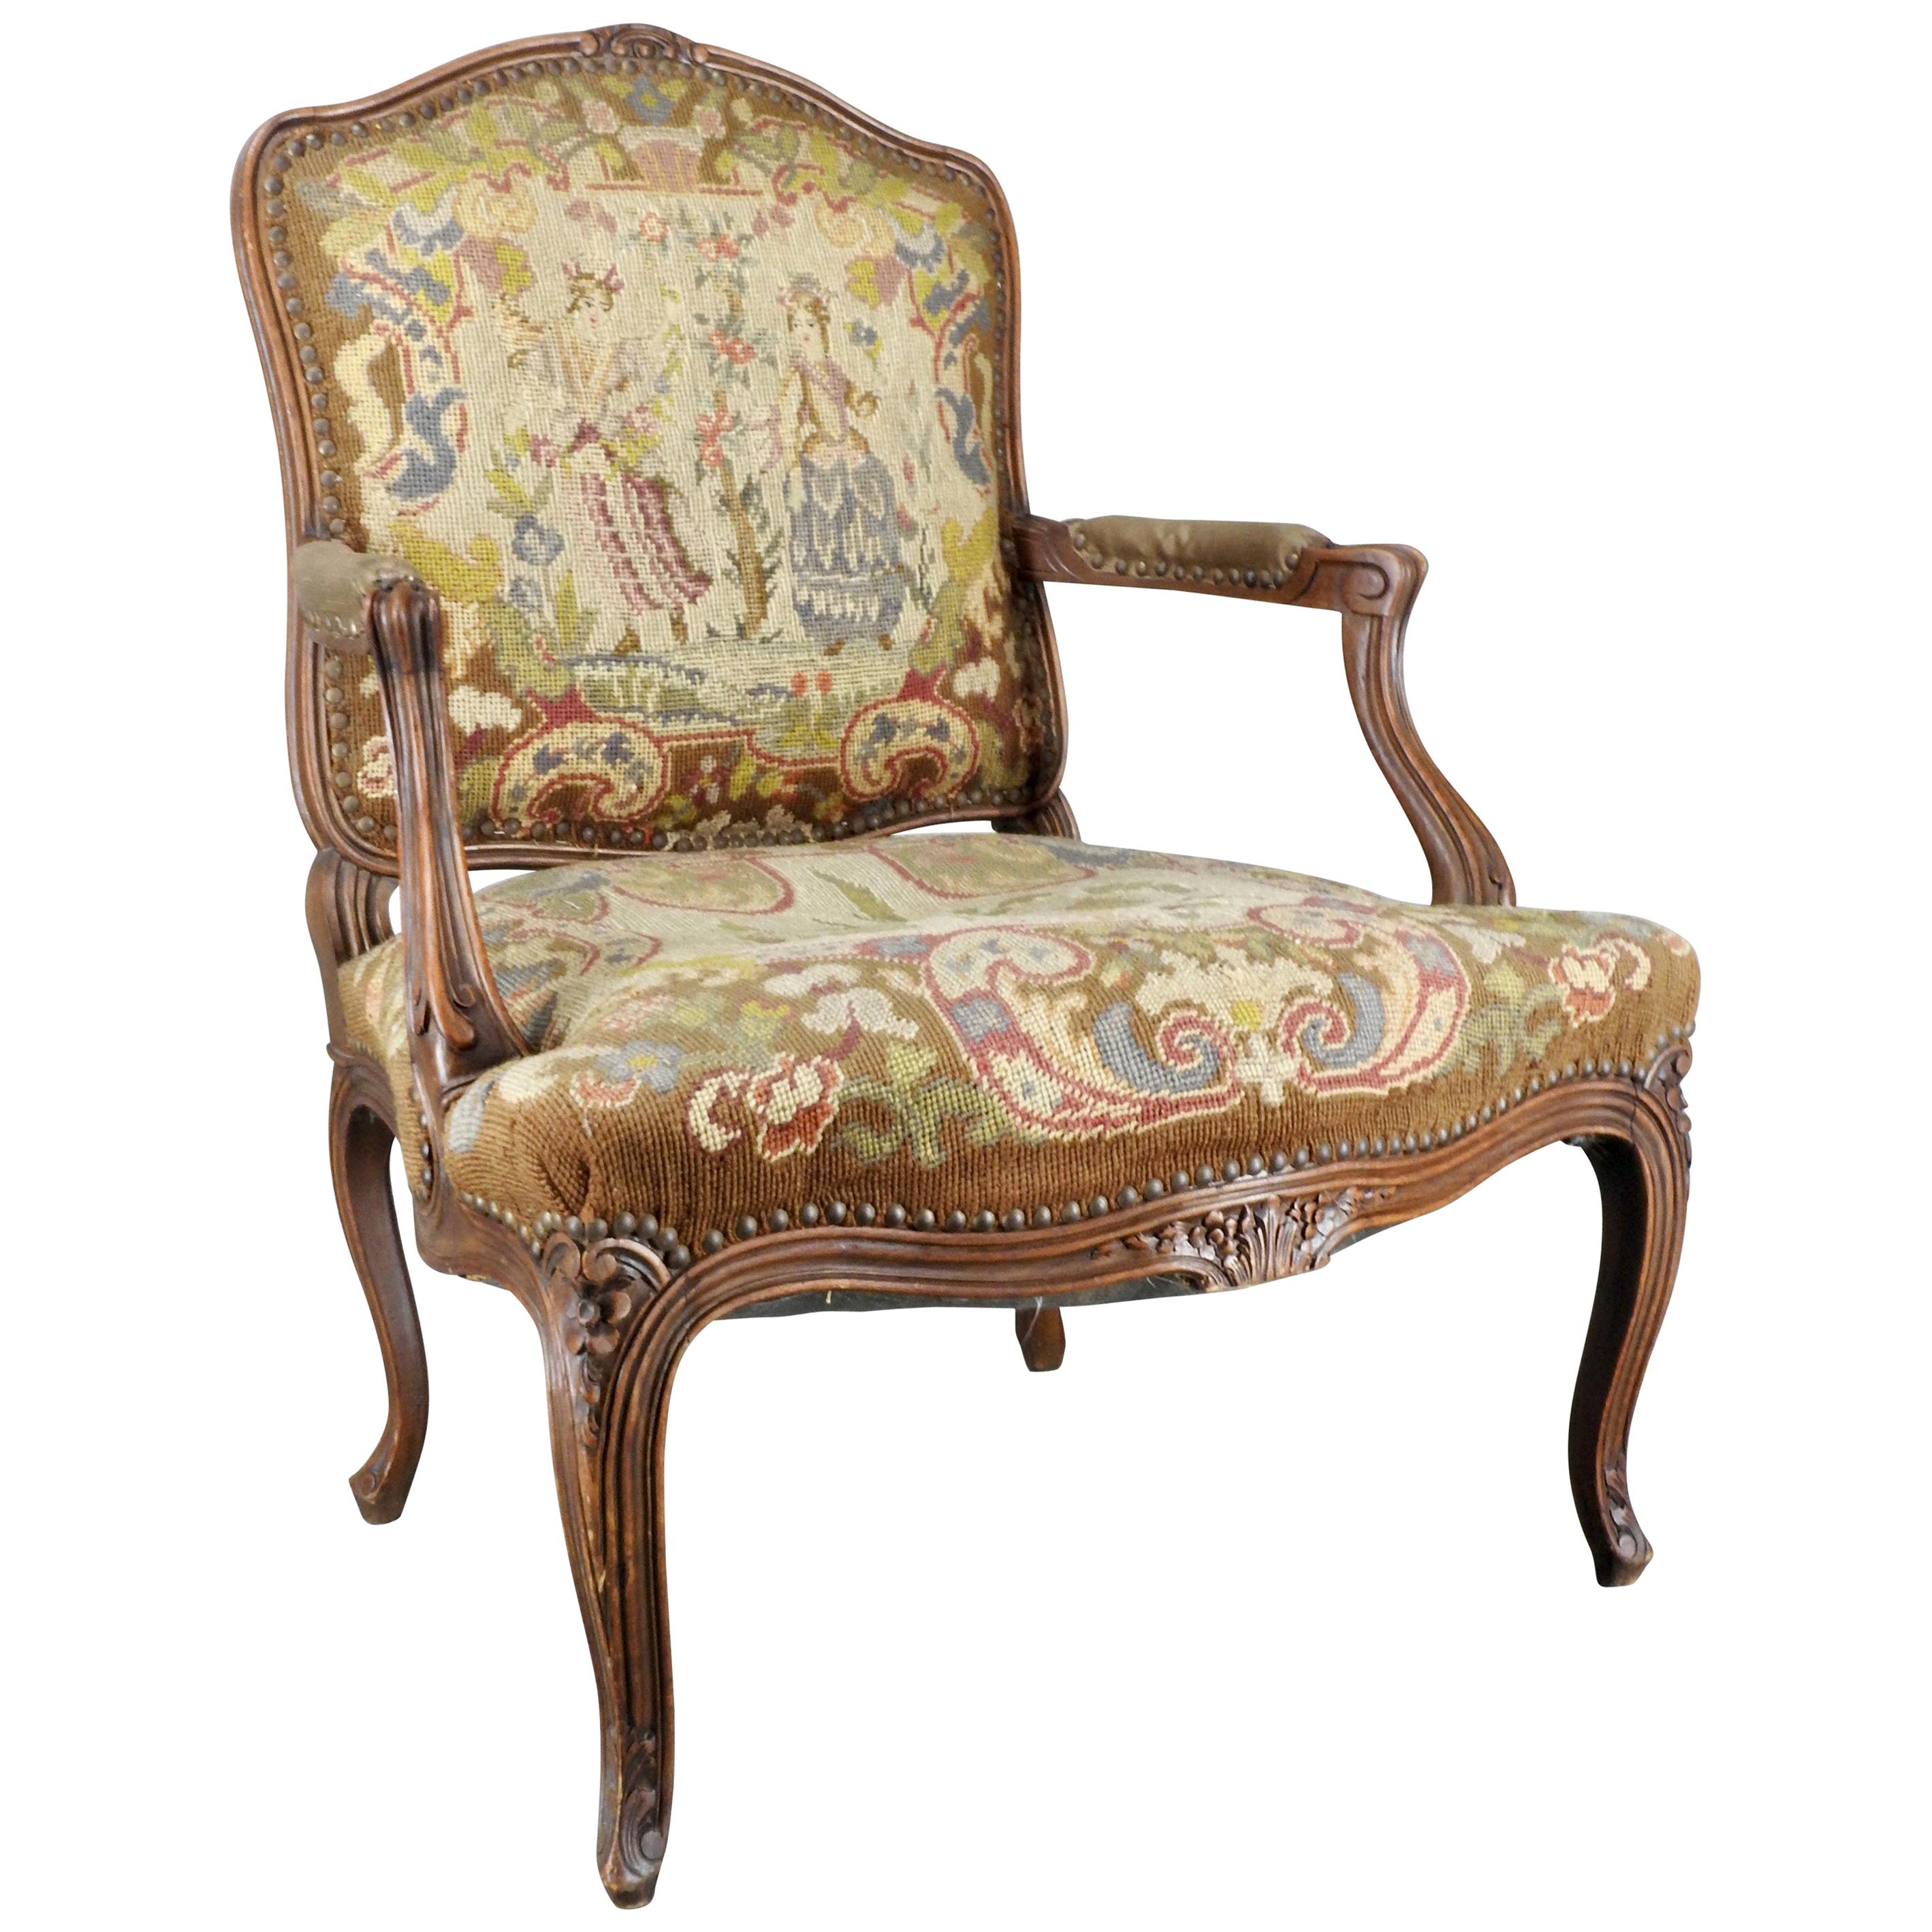 Minder Verblinding Empirisch French Rococo Fauteuil with Needlepoint Upholstery For Sale at 1stDibs | french  fauteuil, rococo fauteuil chair, fauteuil rococo